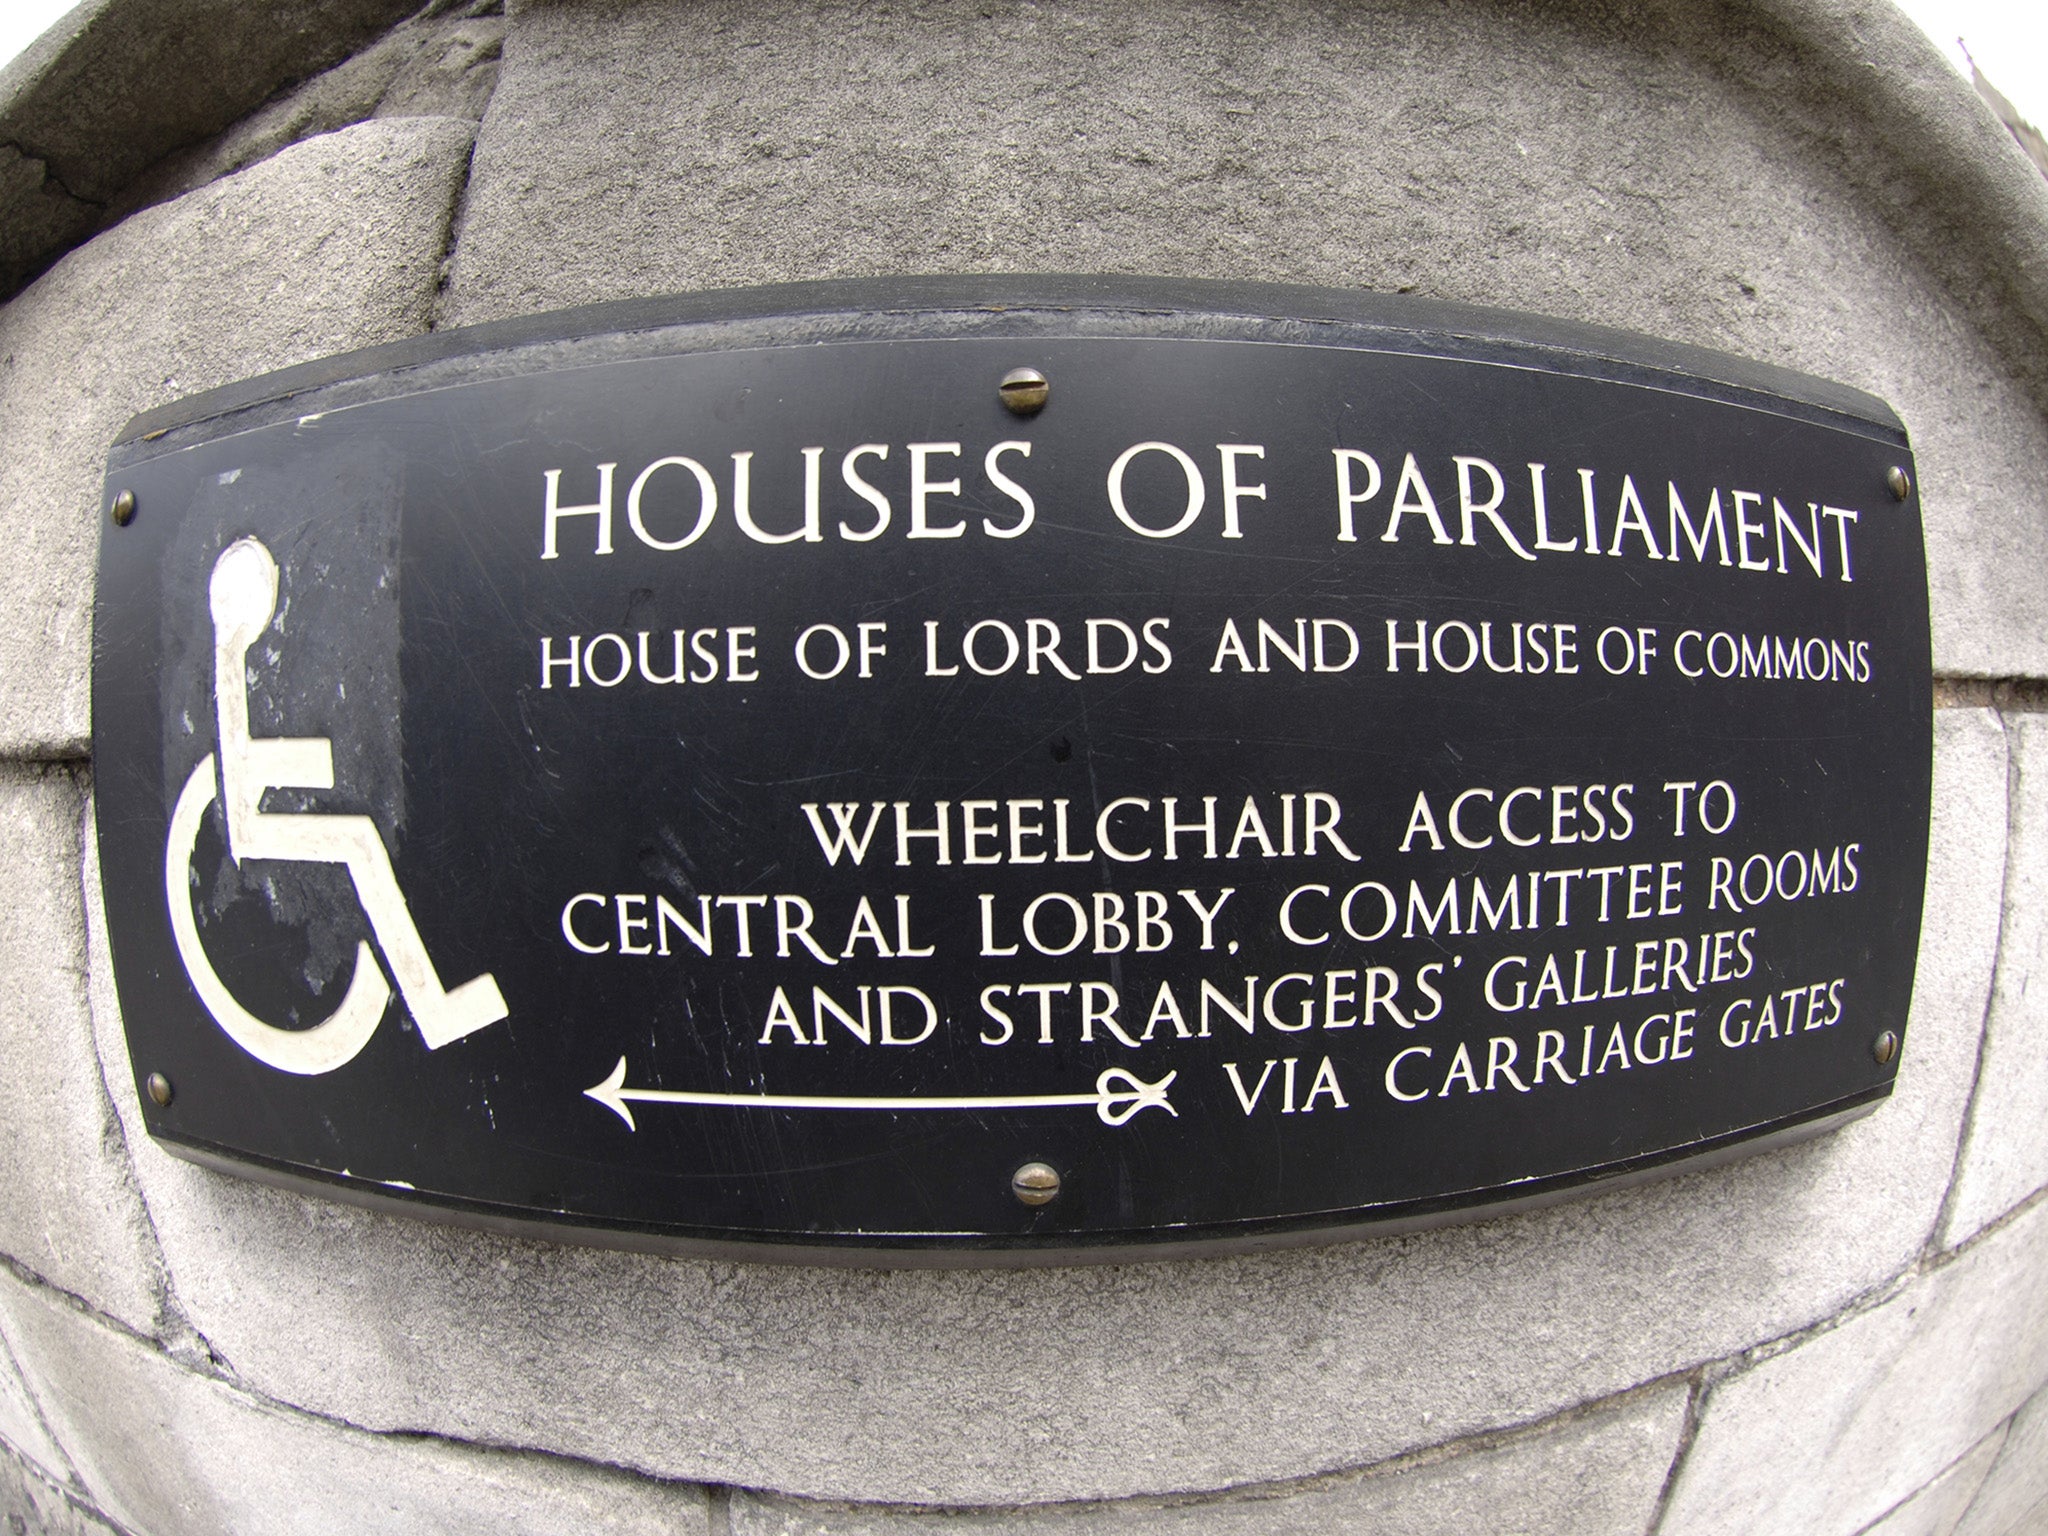 Westminster is poor on disabled access – a metaphor, some might say, for the Government’s recent welfare changes